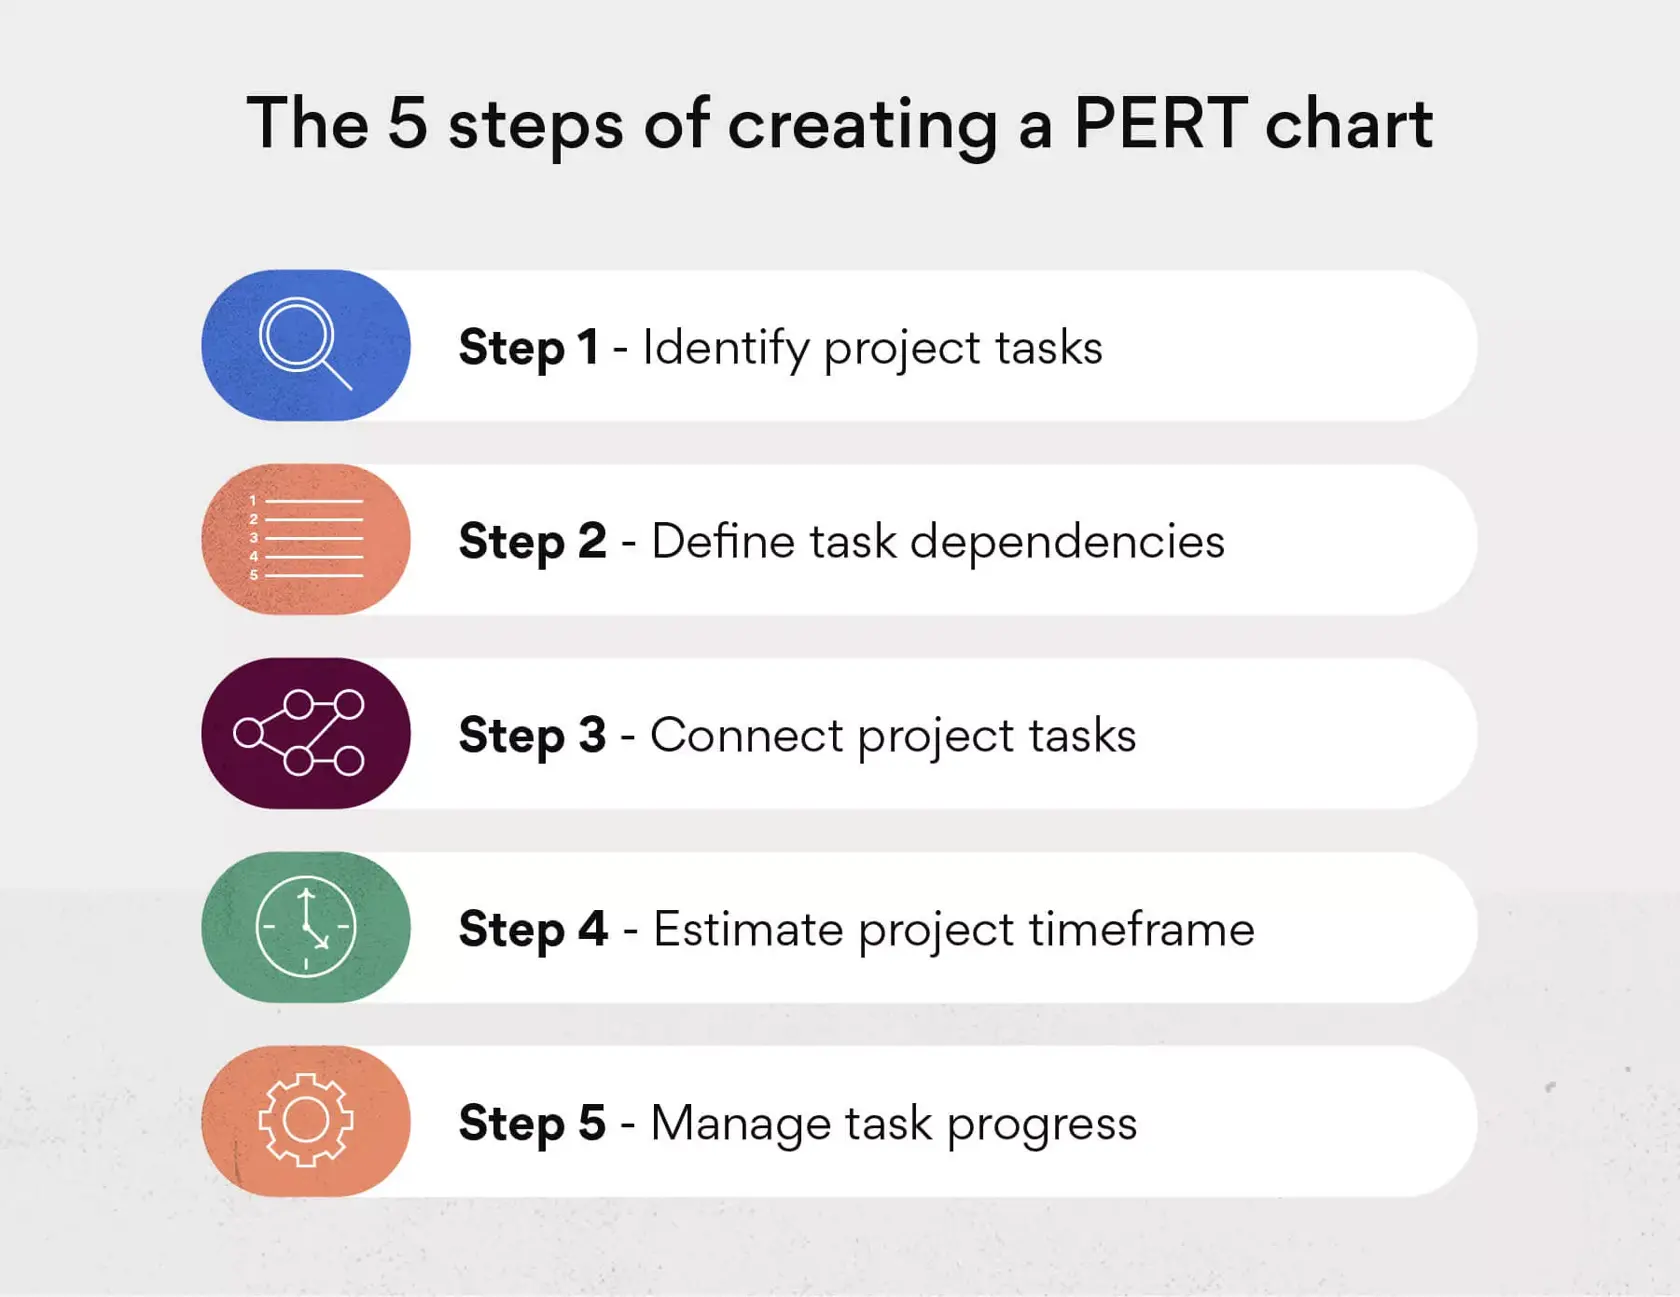 How to make a PERT chart